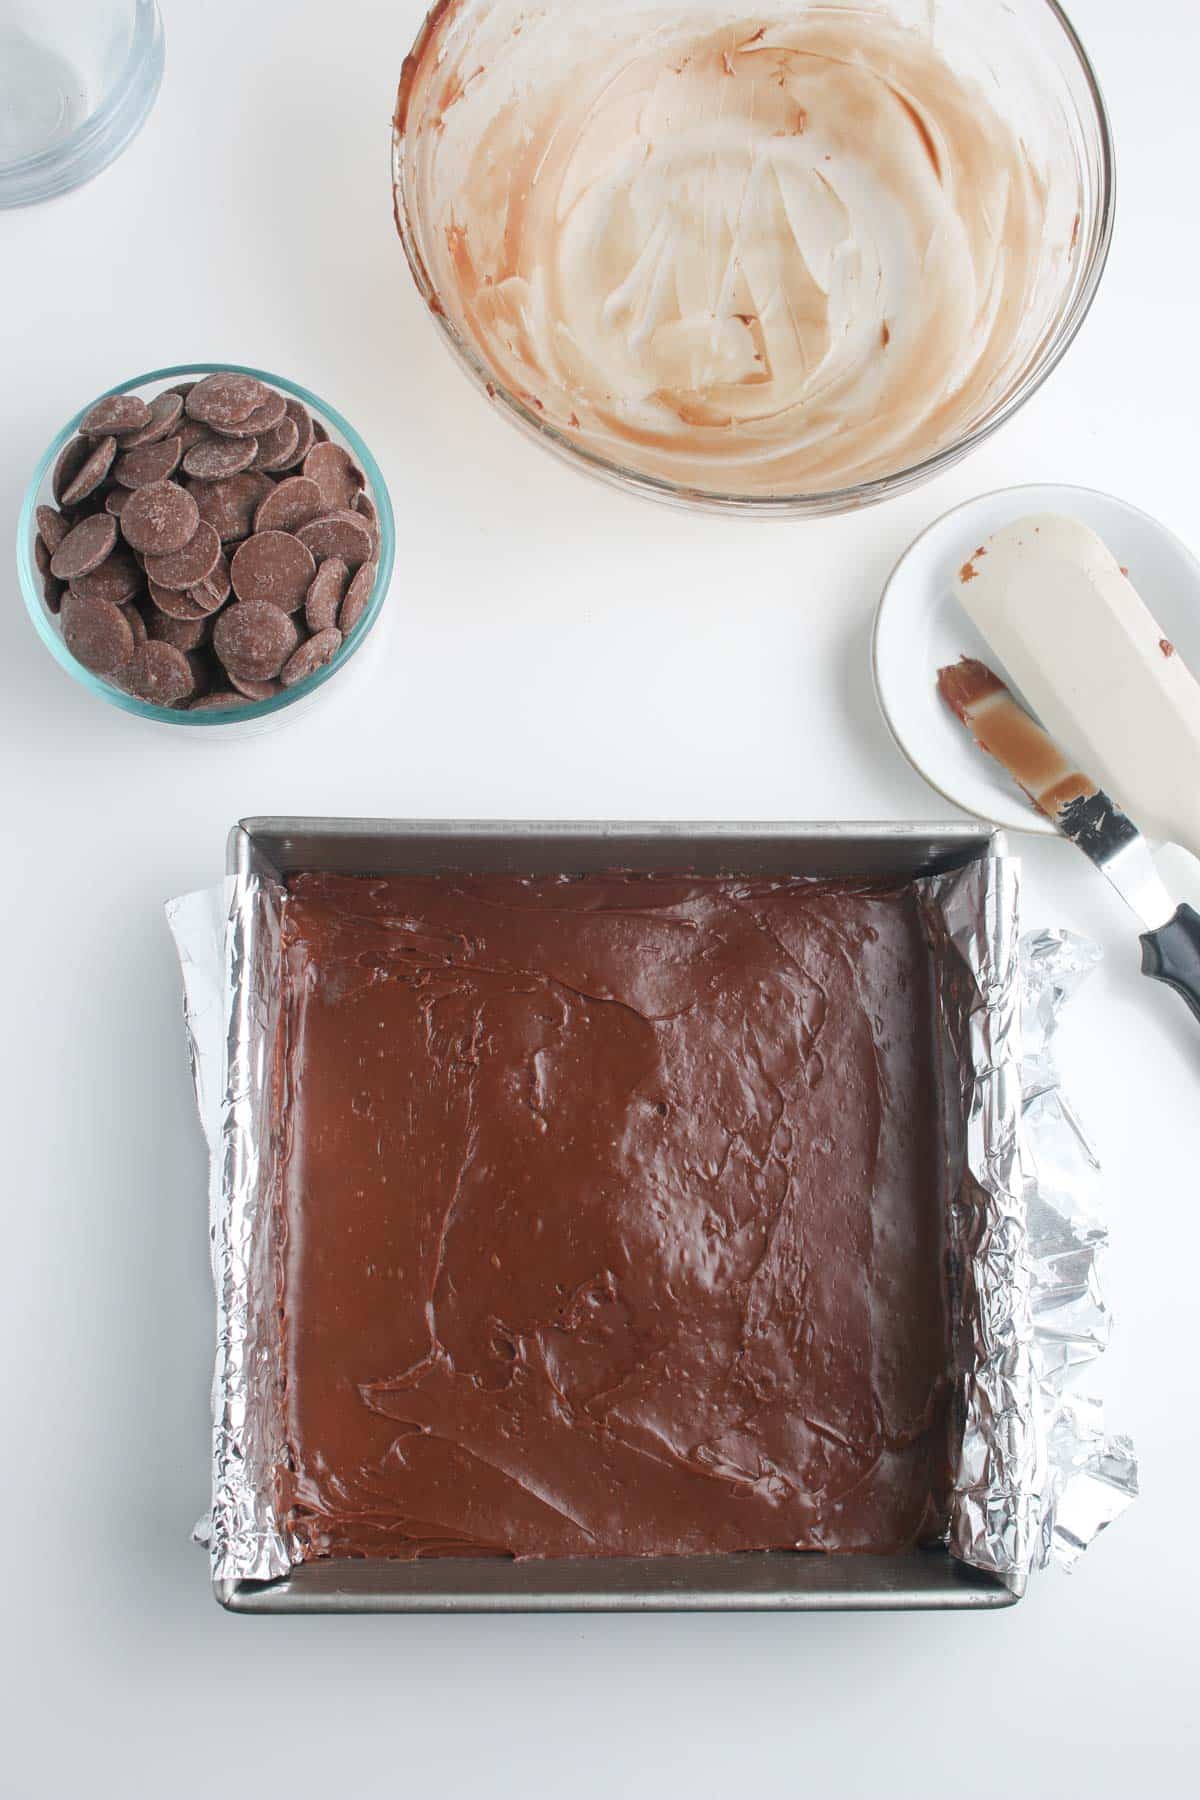 A baking pan with chocolate and other ingredients.